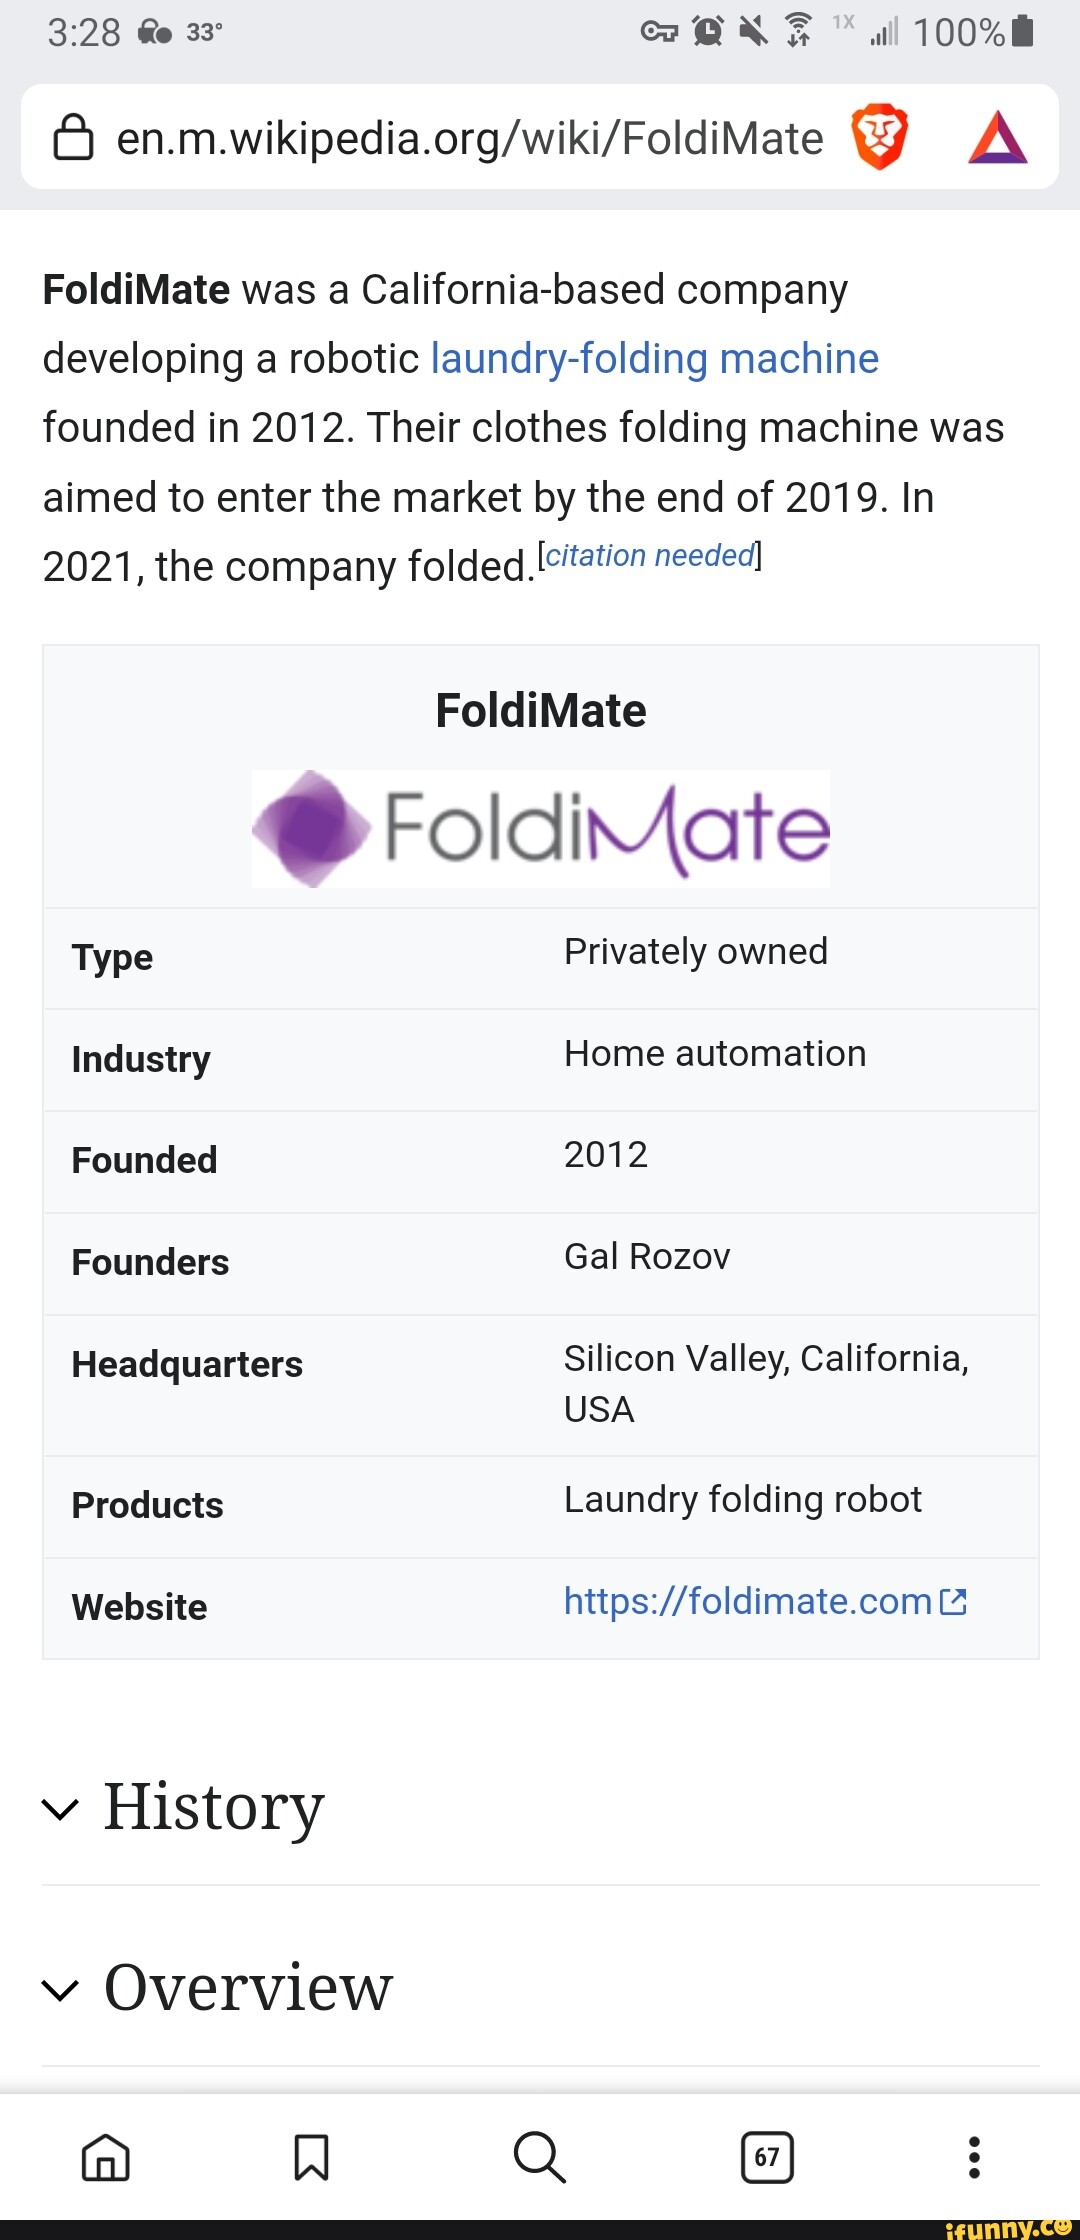 Re FoldiMate was a California-based company developing a robotic laundry-folding  machine founded in 2012.